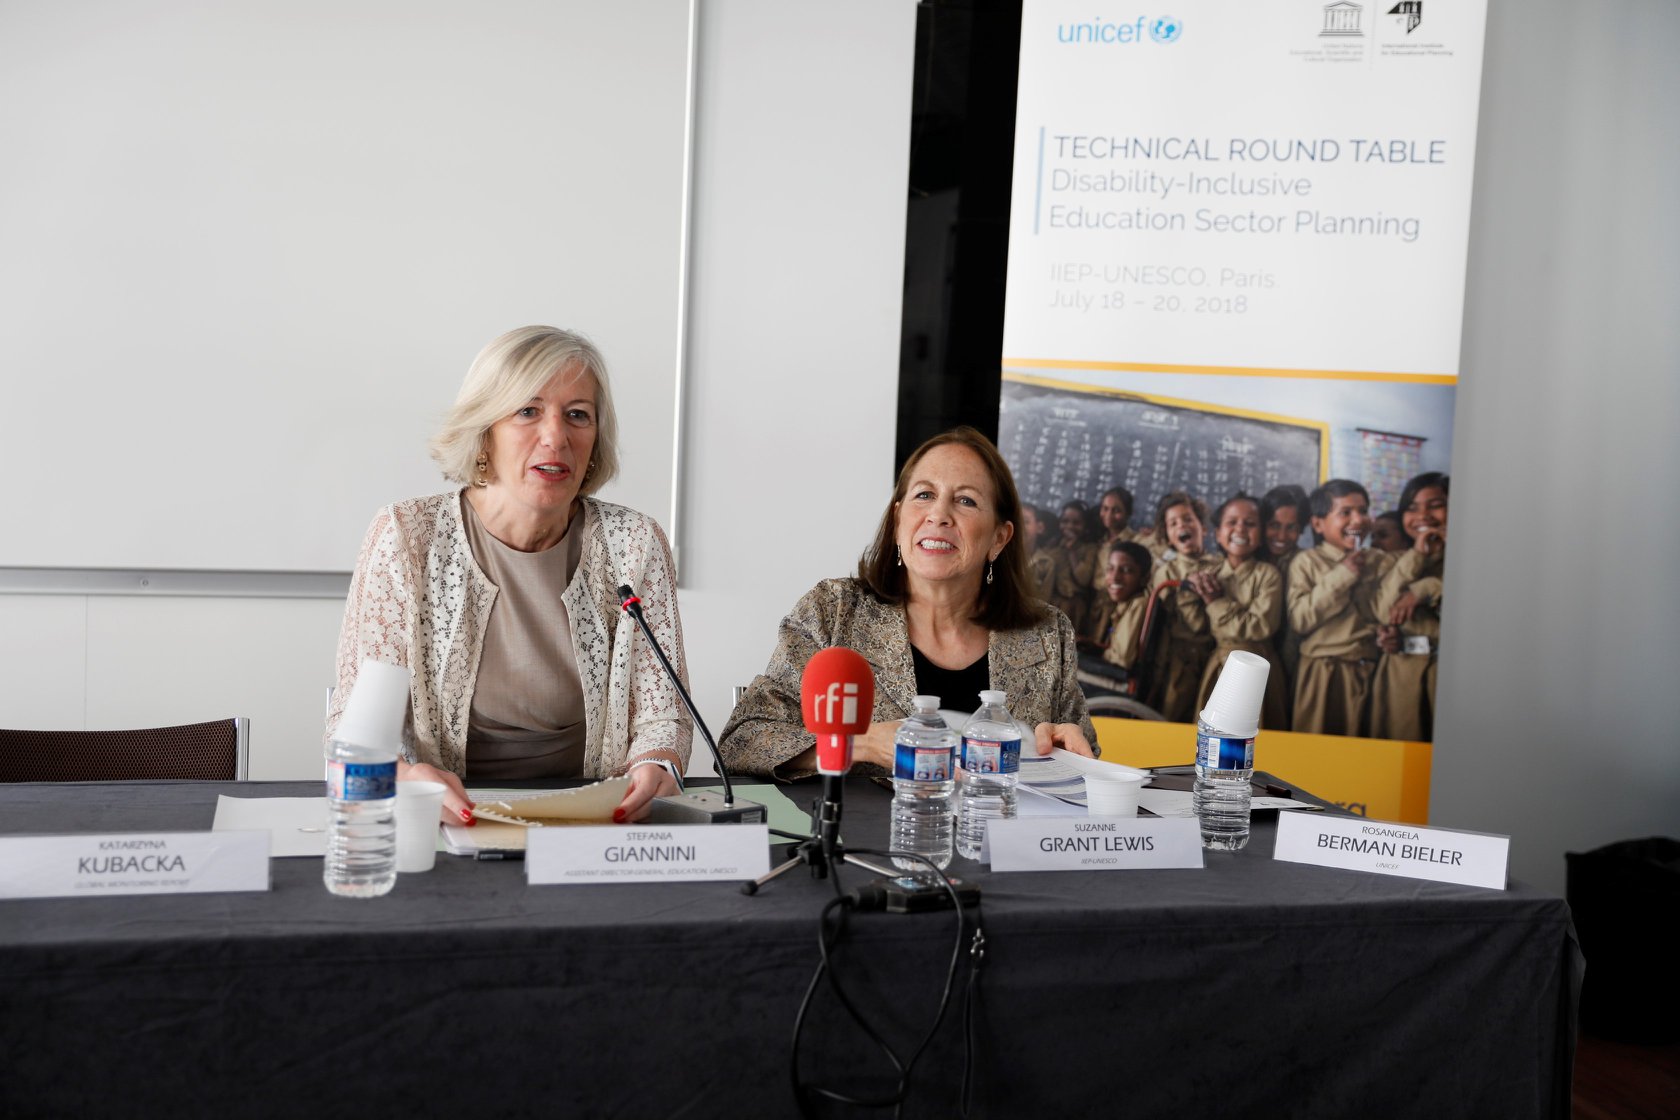 UNESCO Assistant Director for Education Stefania Giannini and IIEP Director Suzanne Grant Lewis